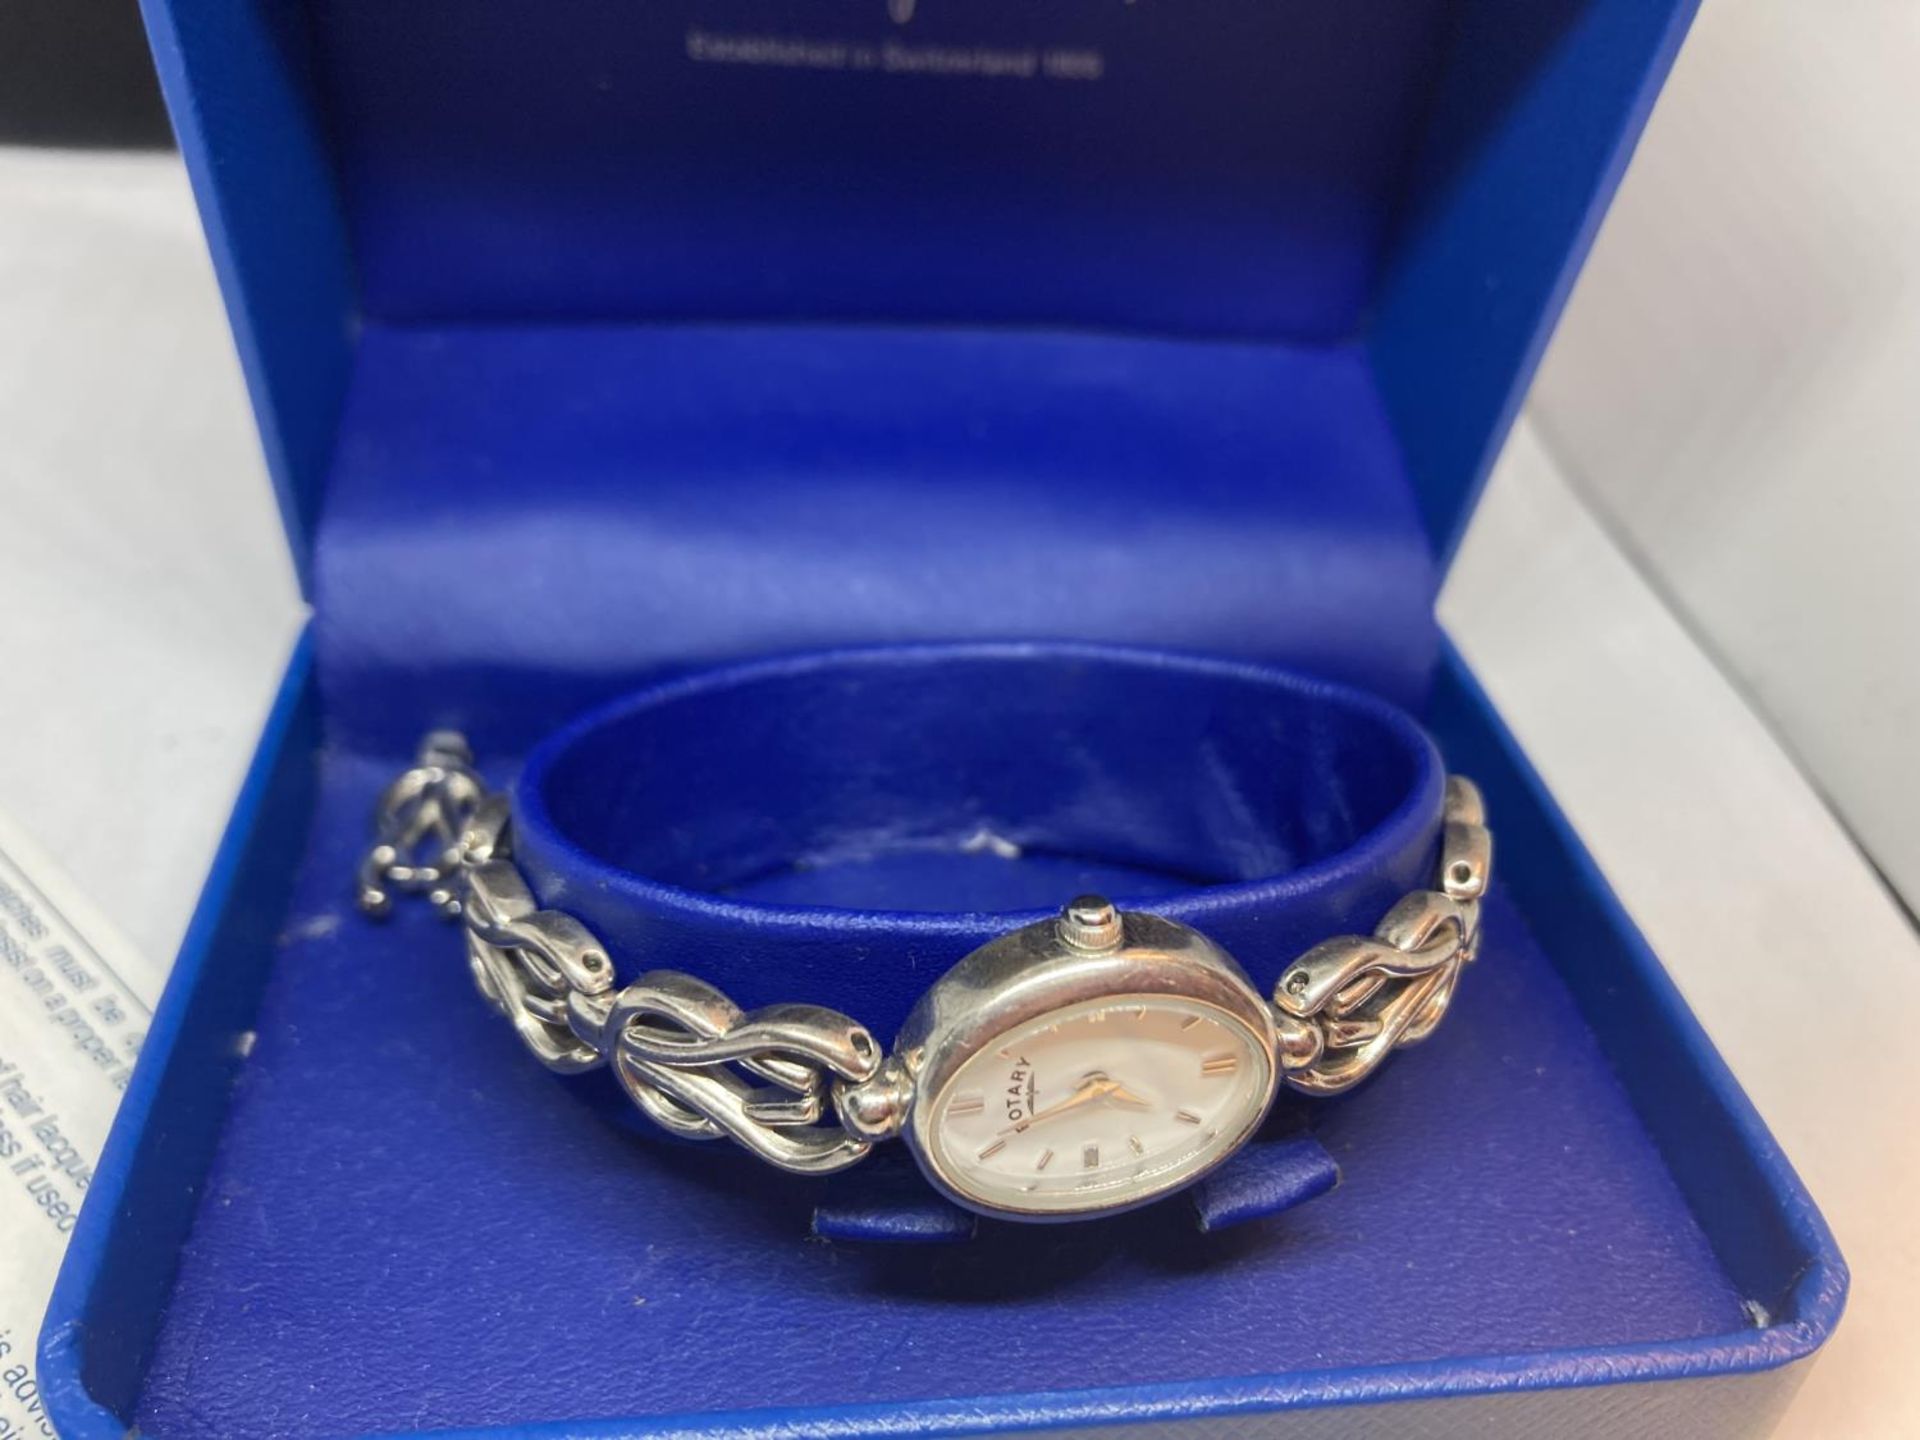 A SILVER ROTARY WRIST WATCH IN A PRESENTATION BOX - Image 2 of 3